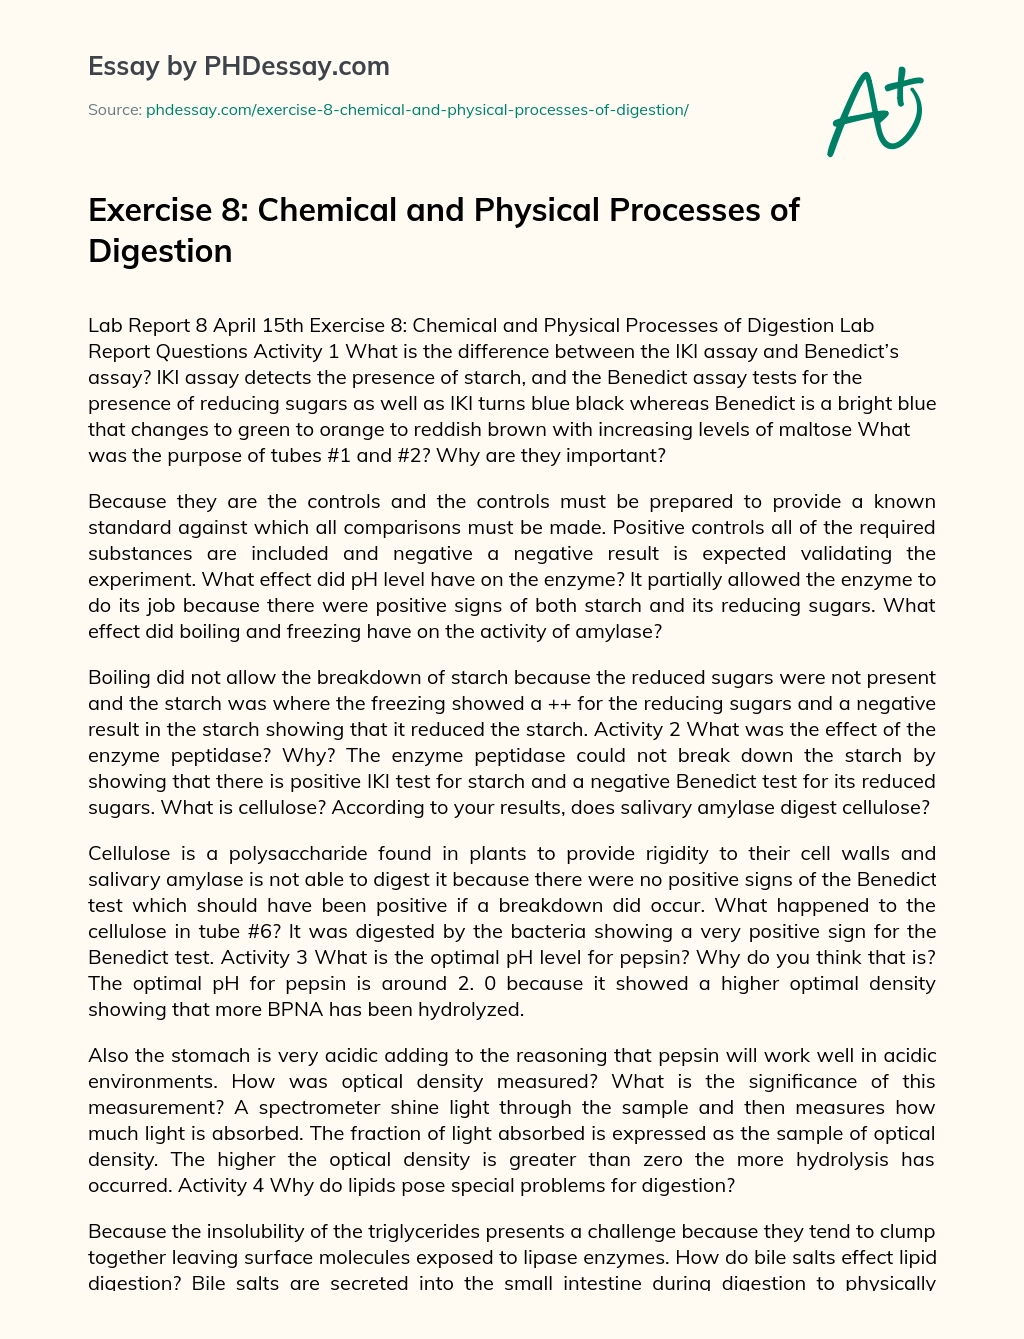 Exercise 8: Chemical and Physical Processes of Digestion essay